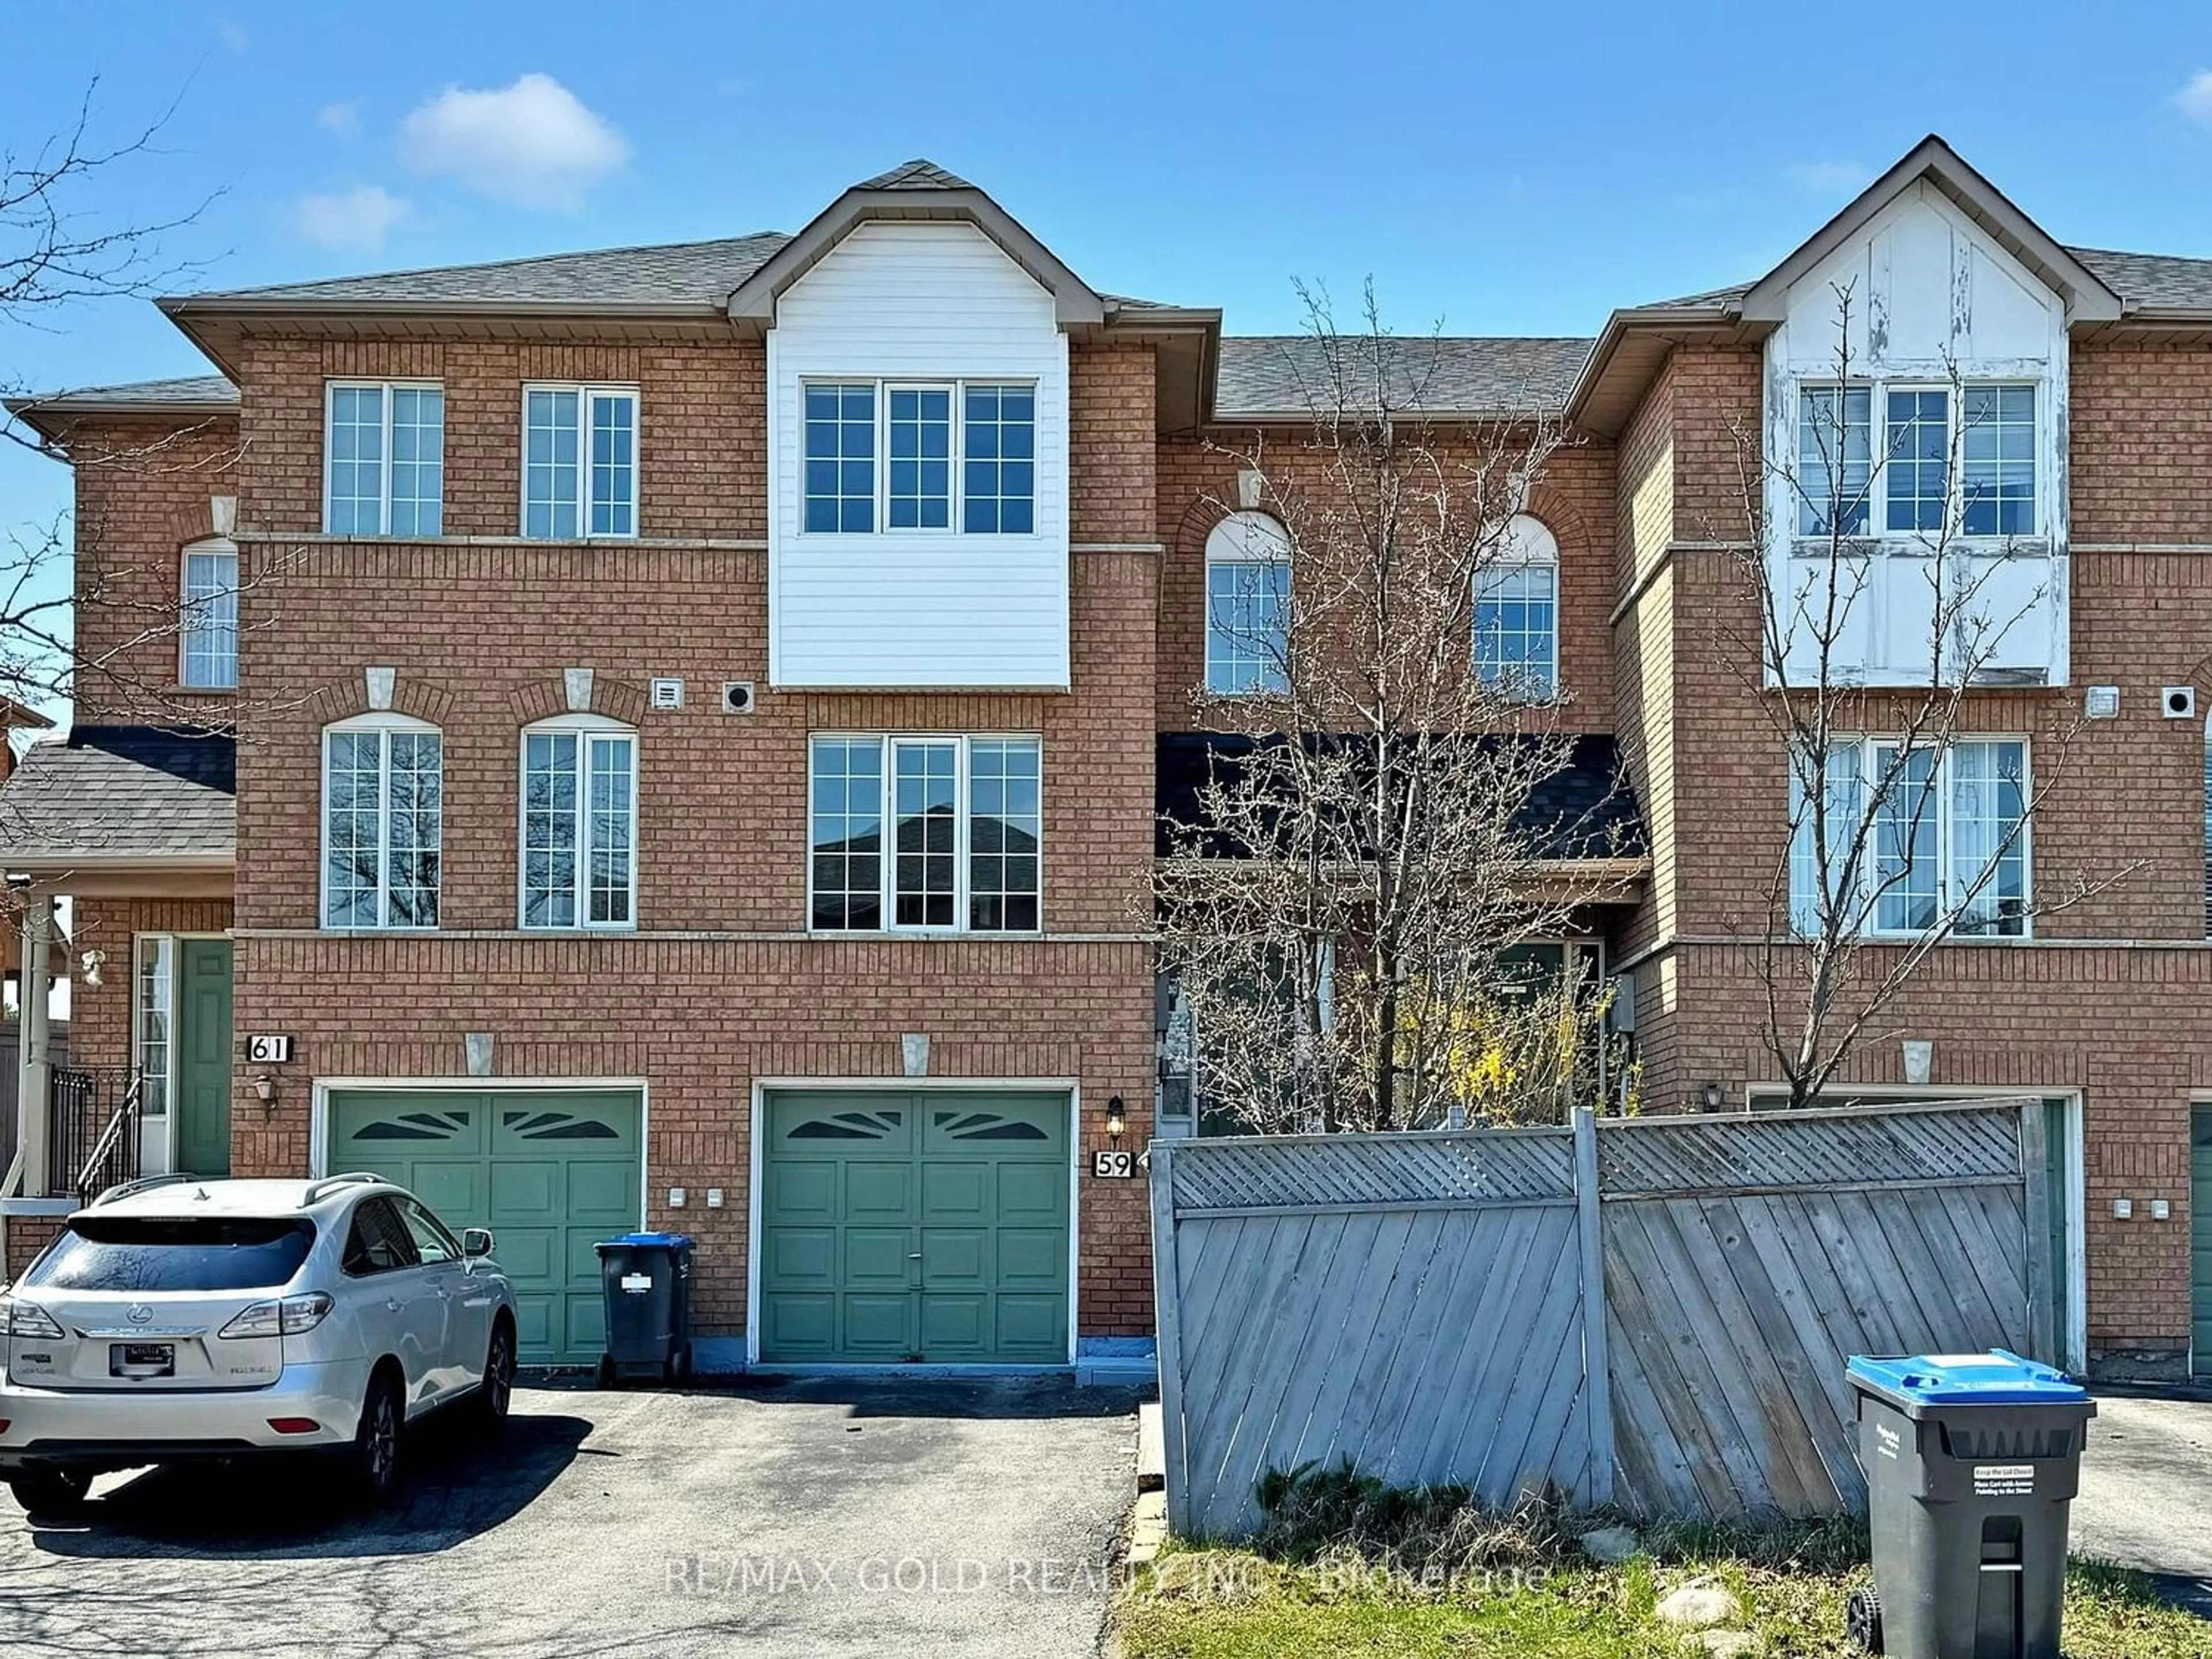 A pic from exterior of the house or condo for 65 Brickyard Way #59, Brampton Ontario L6V 4M2